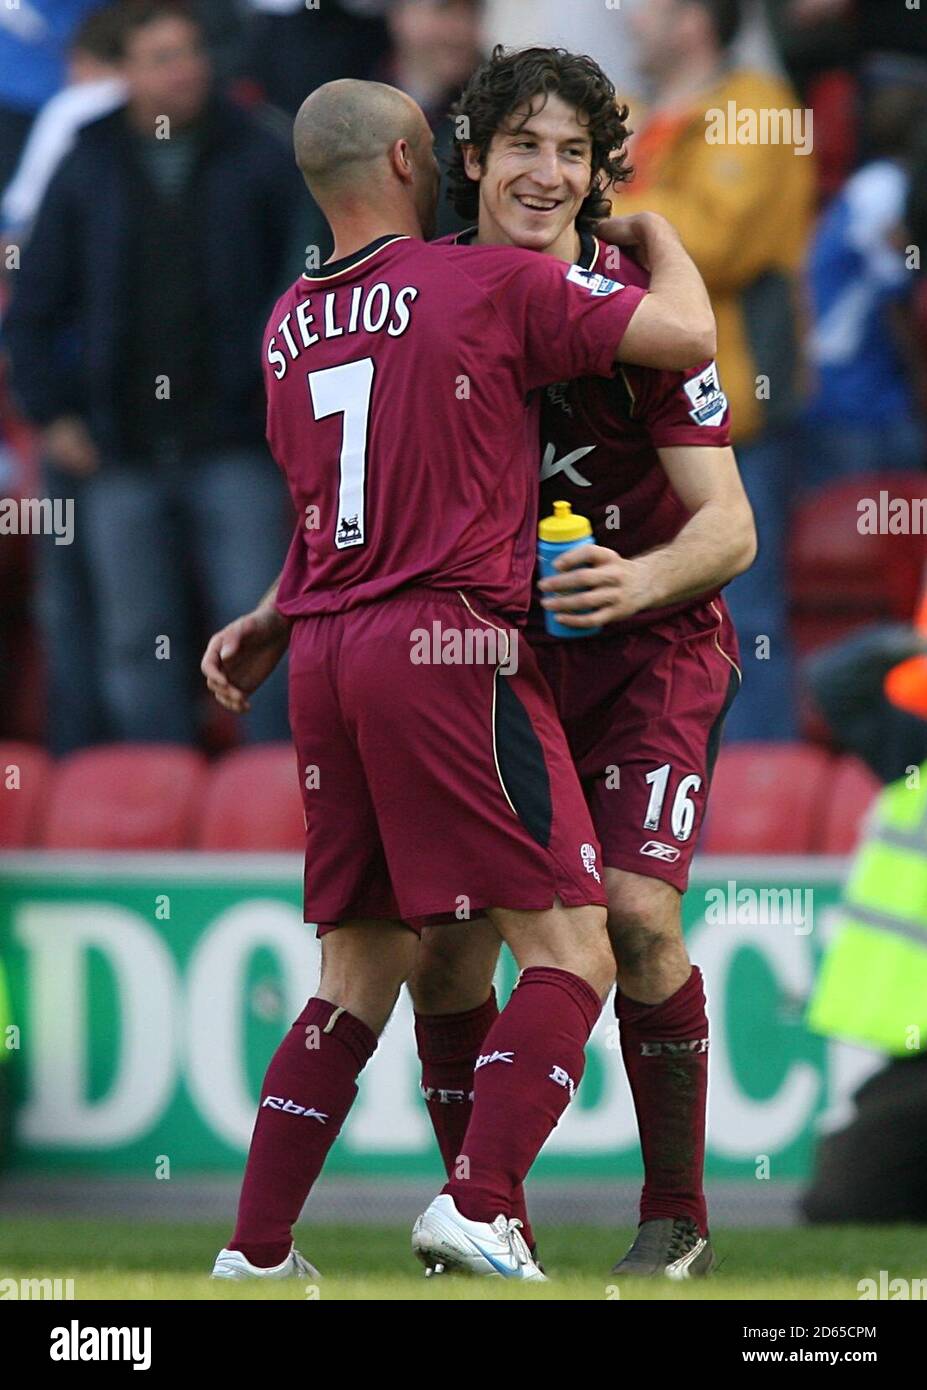 Bolton Wanderers Andranik Teymourian and Stelios Giannakopoulos celebrate victory at the end of the game Stock Photo